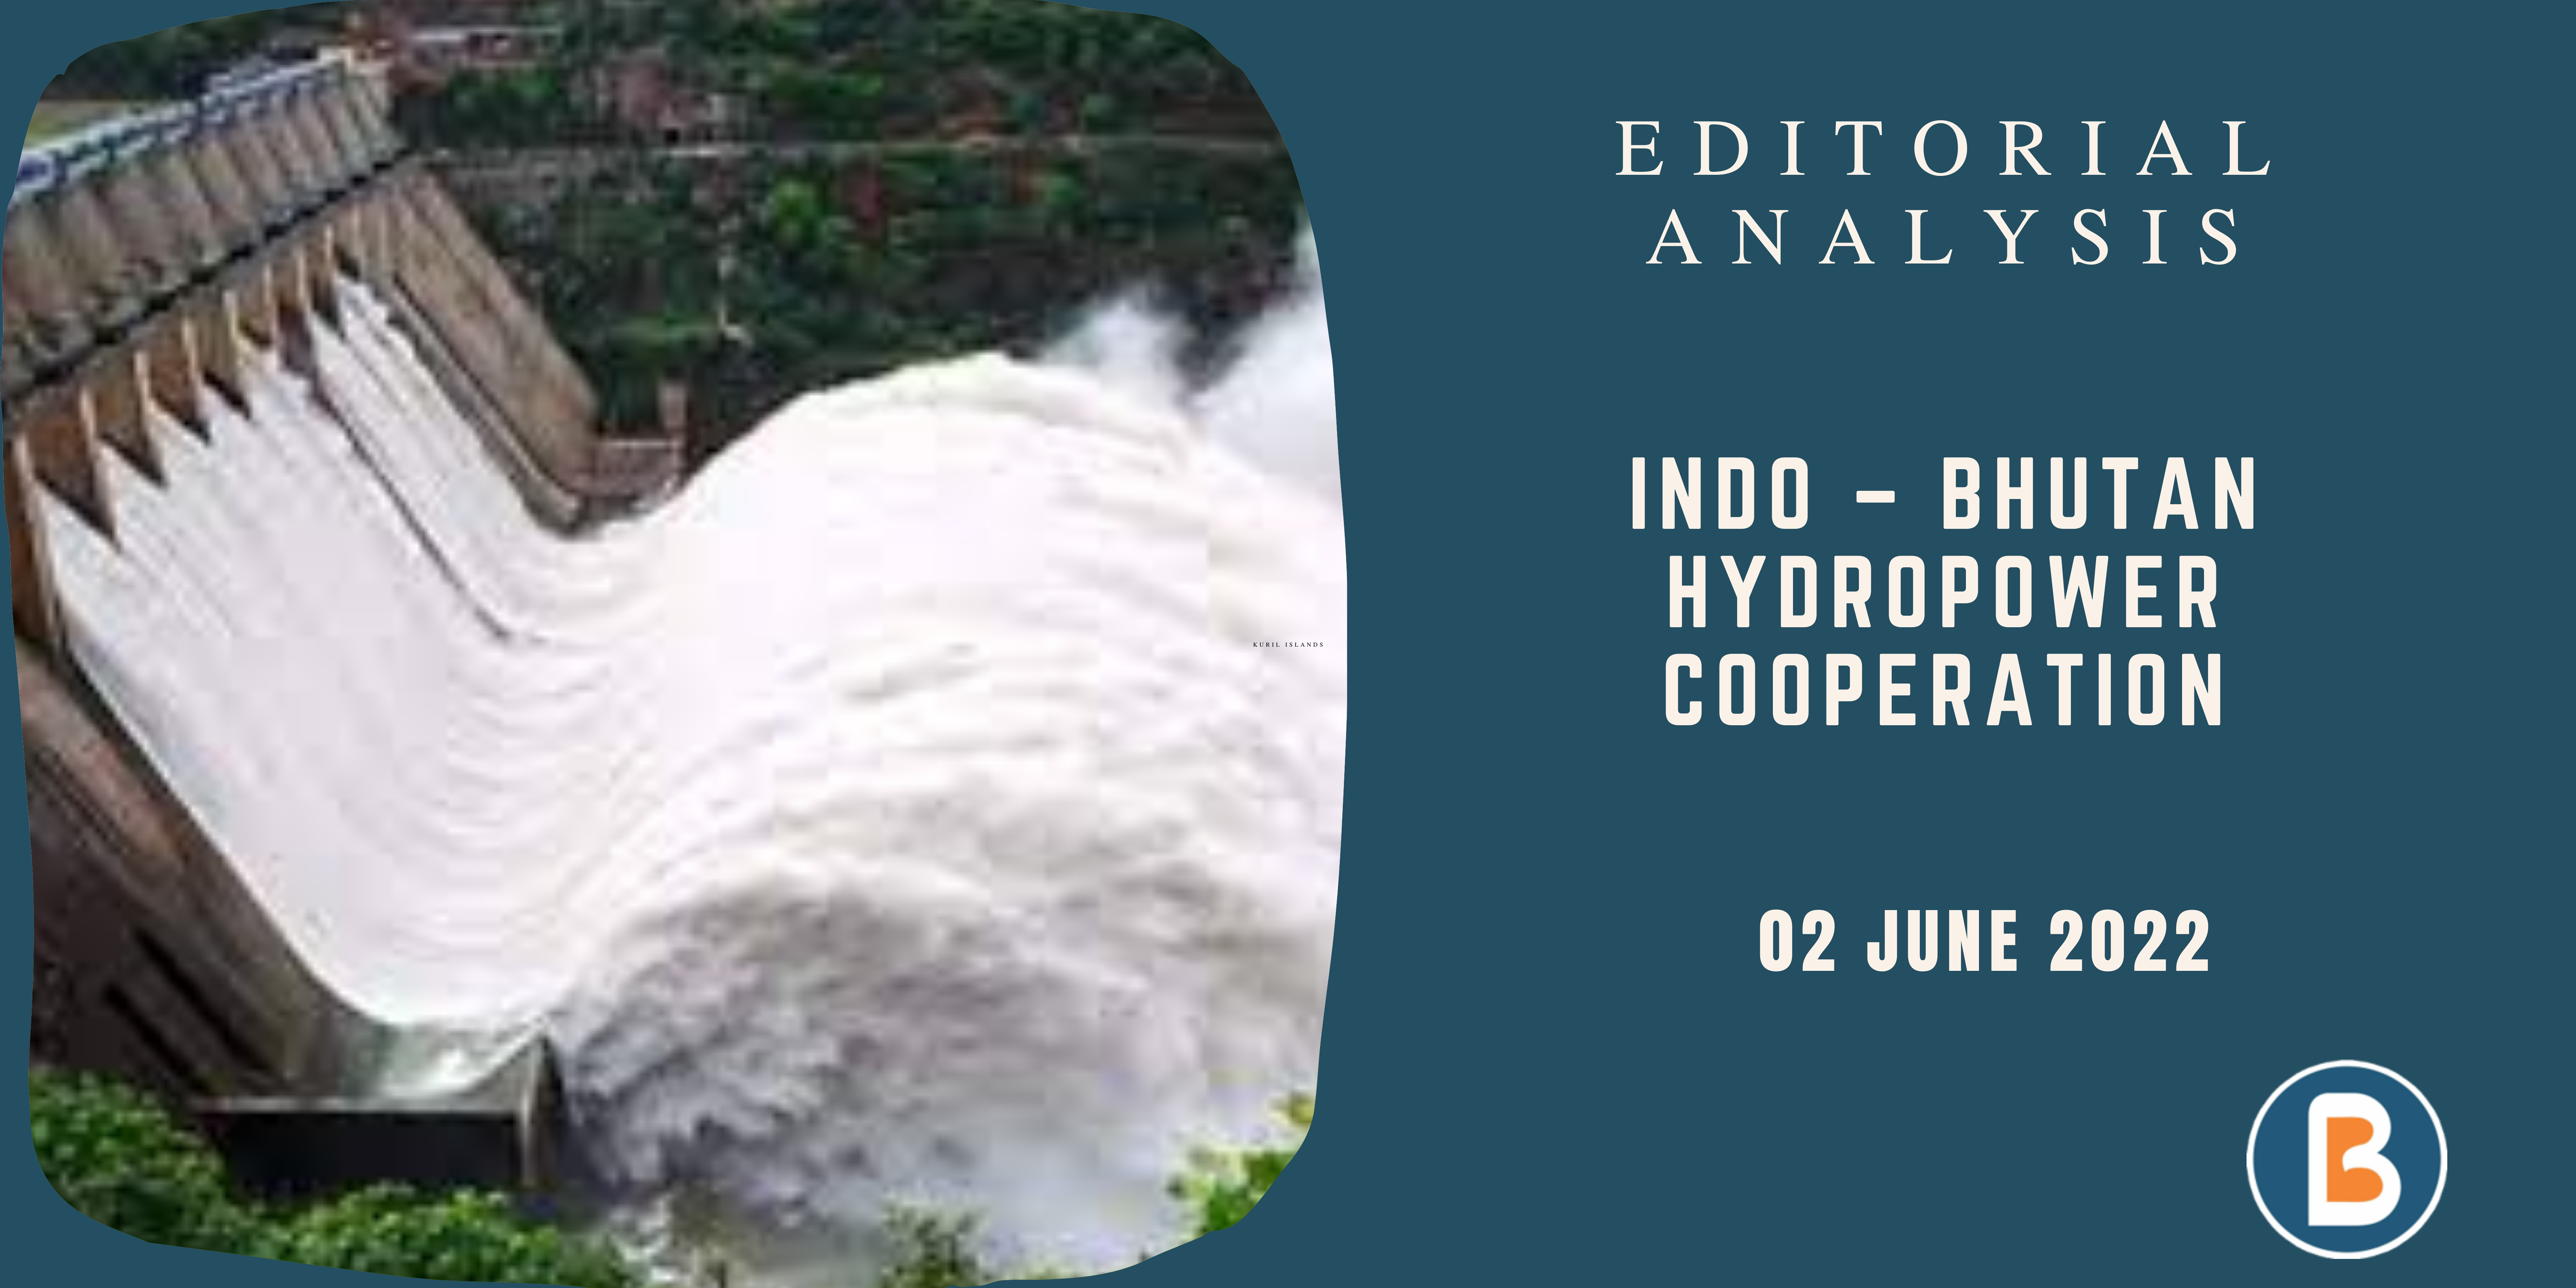 Editorial Analysis for UPSC - Indo – Bhutan Hydropower Cooperation